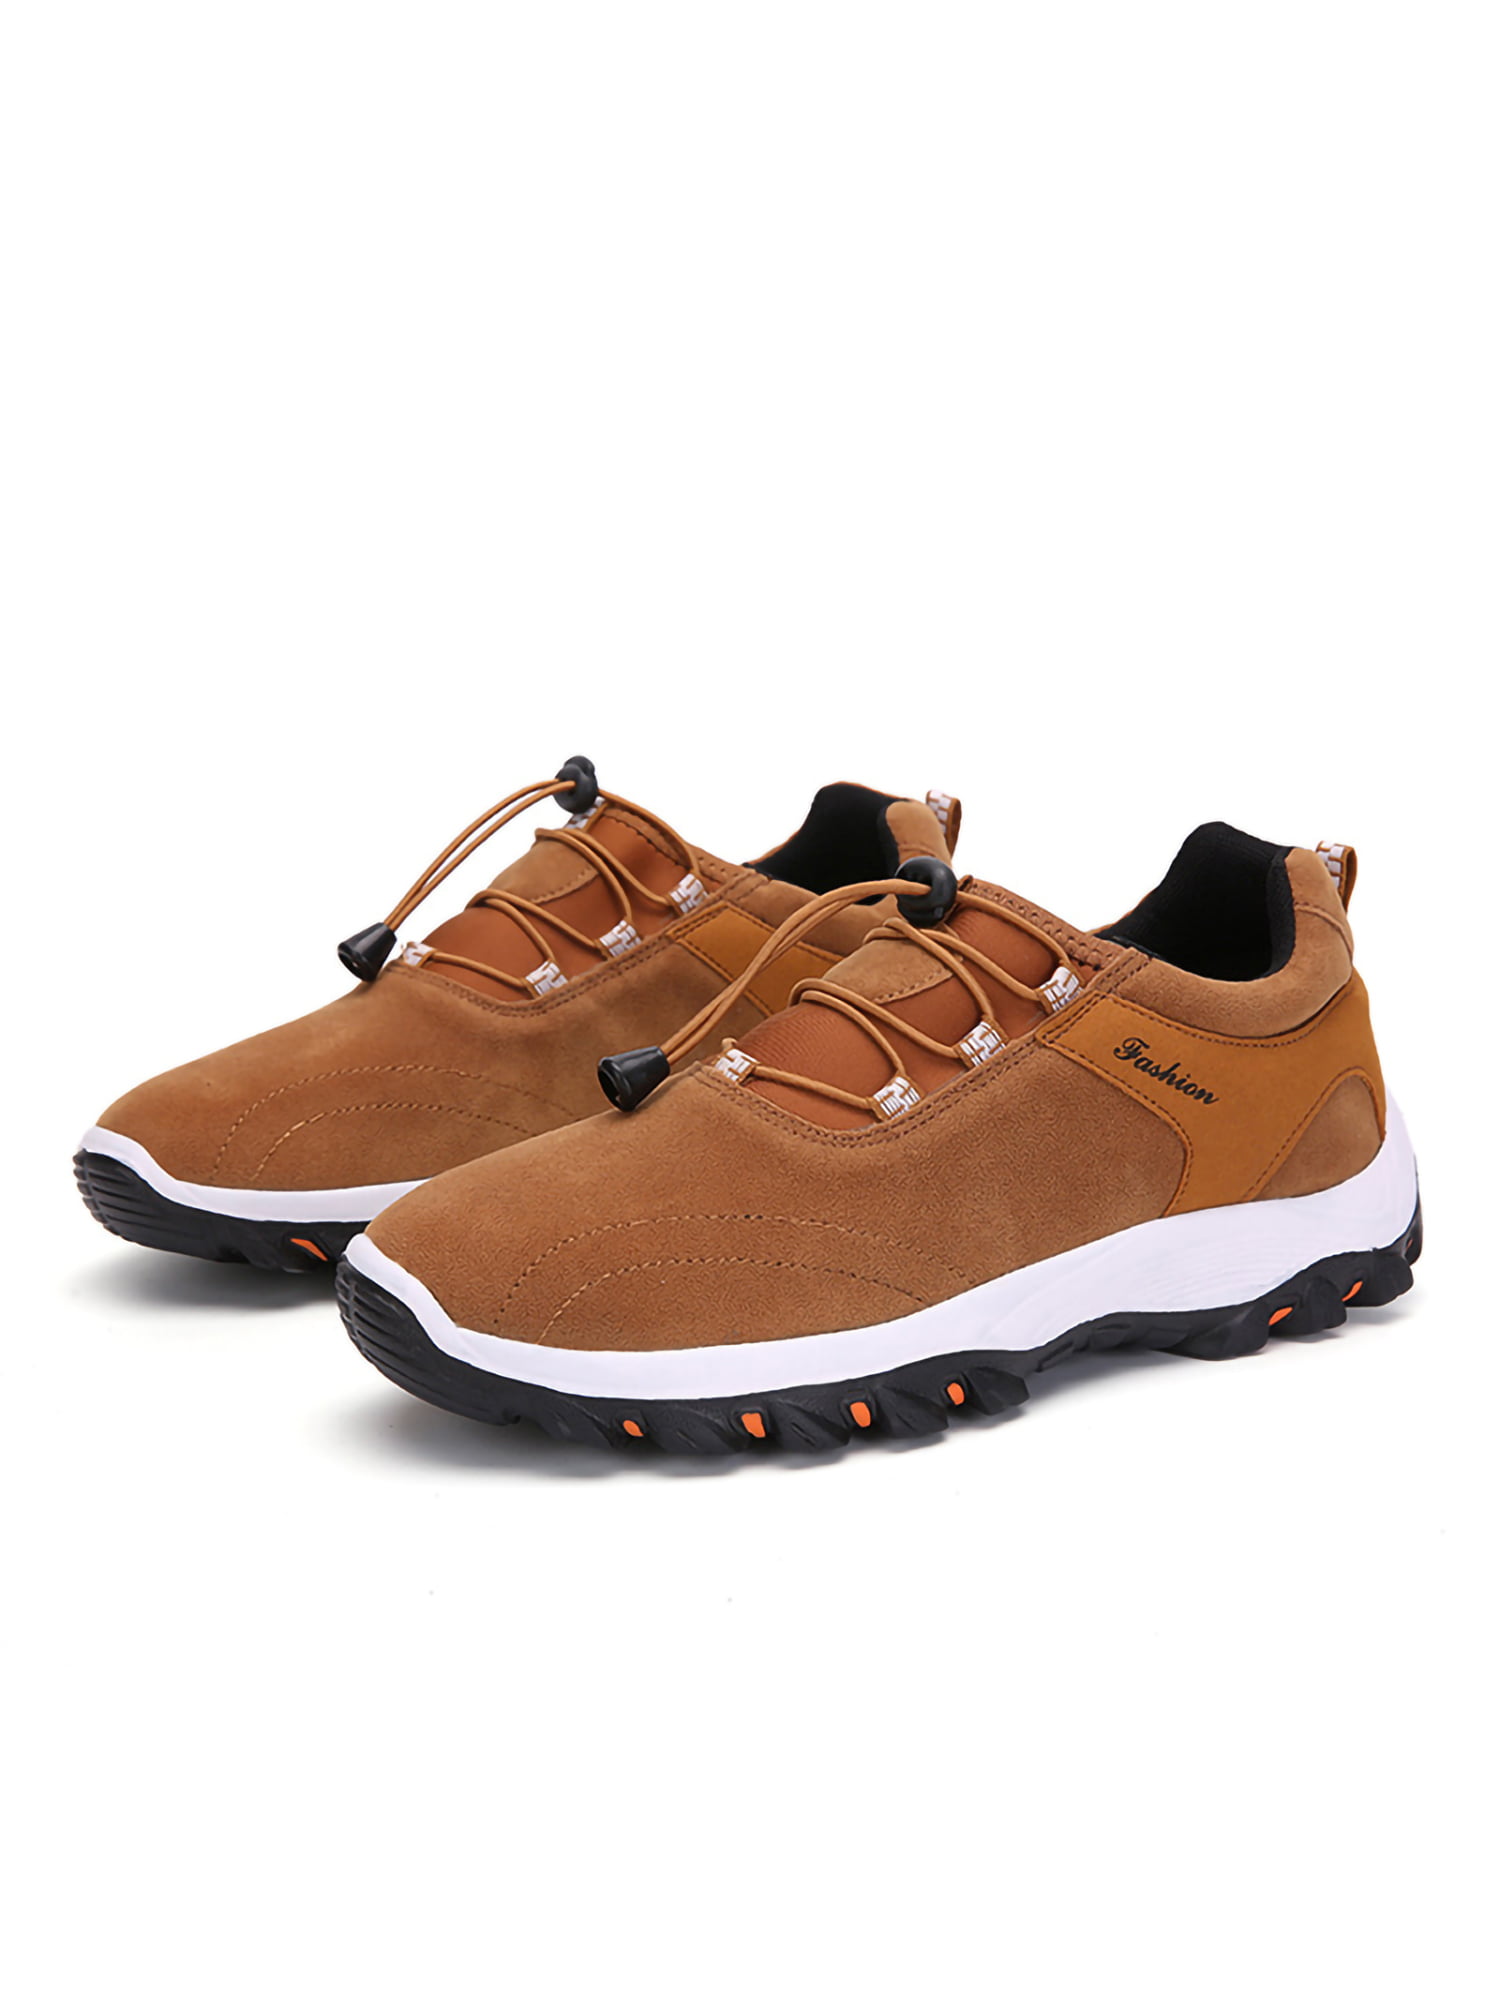 Mens Leather Business Athletic Casual Ankle Sneaker Round Toe Solid Sport Running Antiskid Footwear Climbing Hiking Wear Resistant Comfy Jogging Fitness Walking Outdoors Shoes 